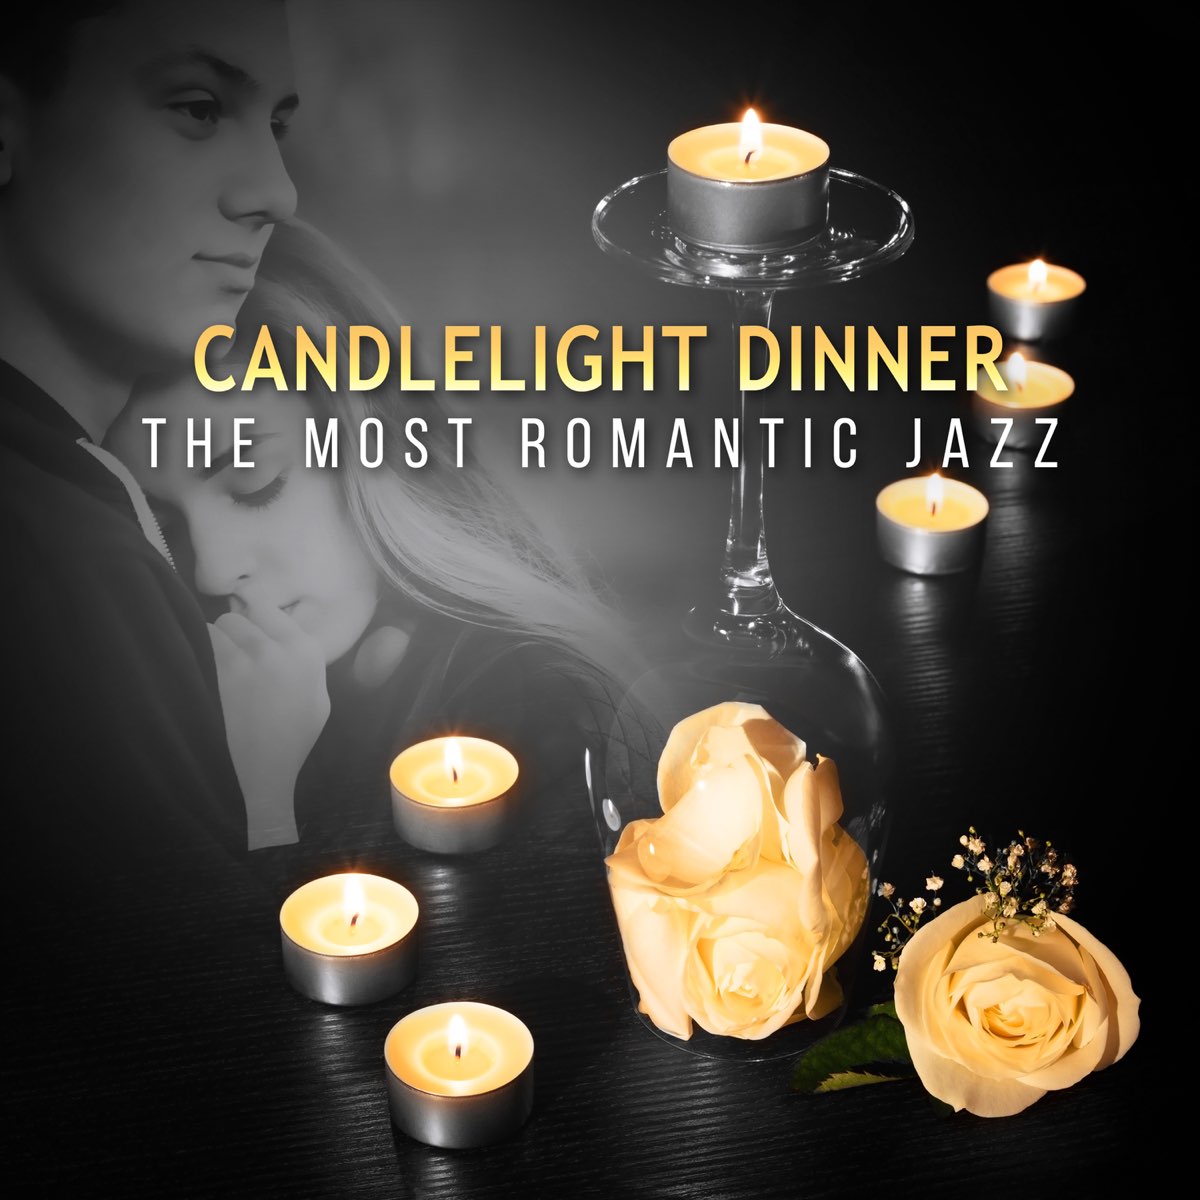 Candlelight Dinner: The Most Romantic Jazz, Soft Instrumental Music, Love  Songs for Romantic Evening & Dinner for Two by Romantic Evening Jazz Club  on Apple Music